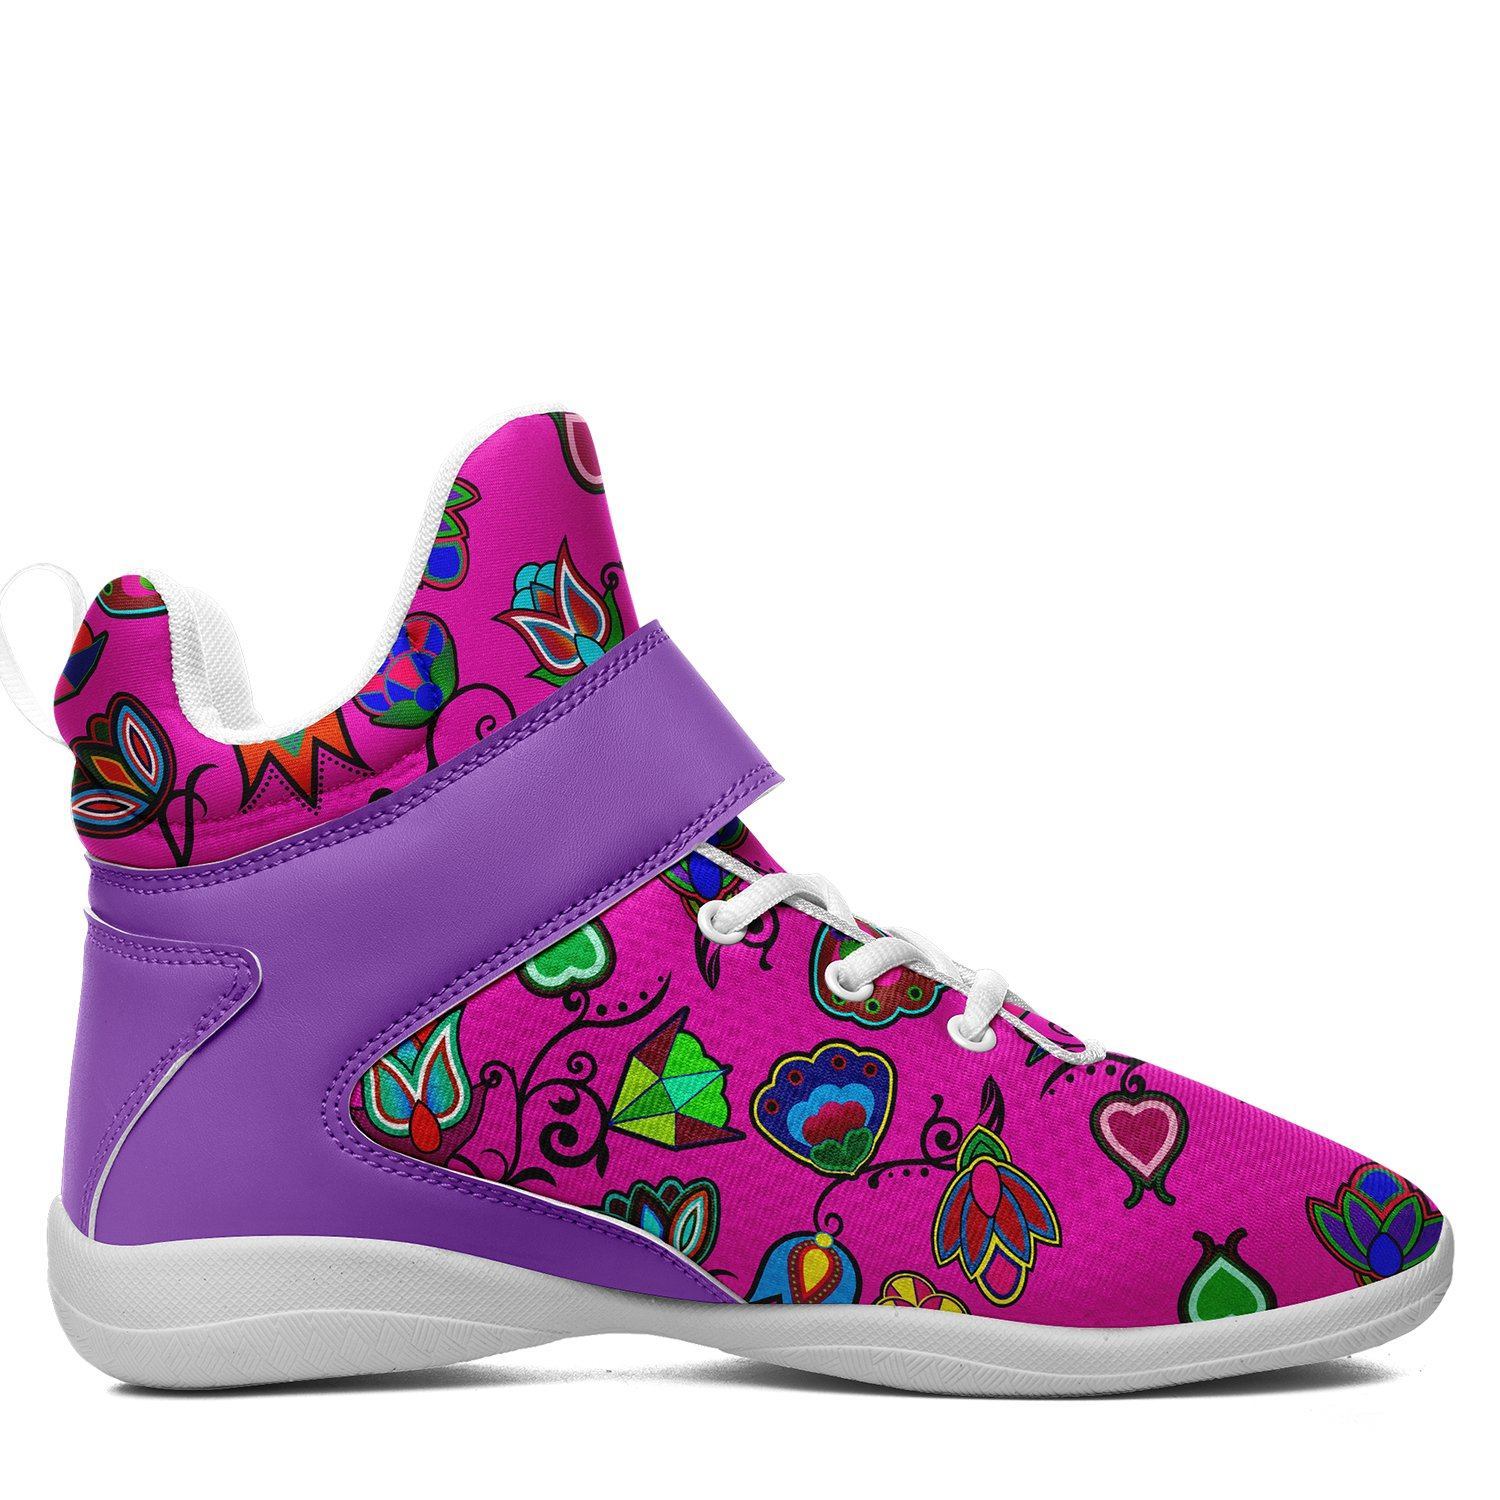 Indigenous Paisley Ipottaa Basketball / Sport High Top Shoes - White Sole 49 Dzine 